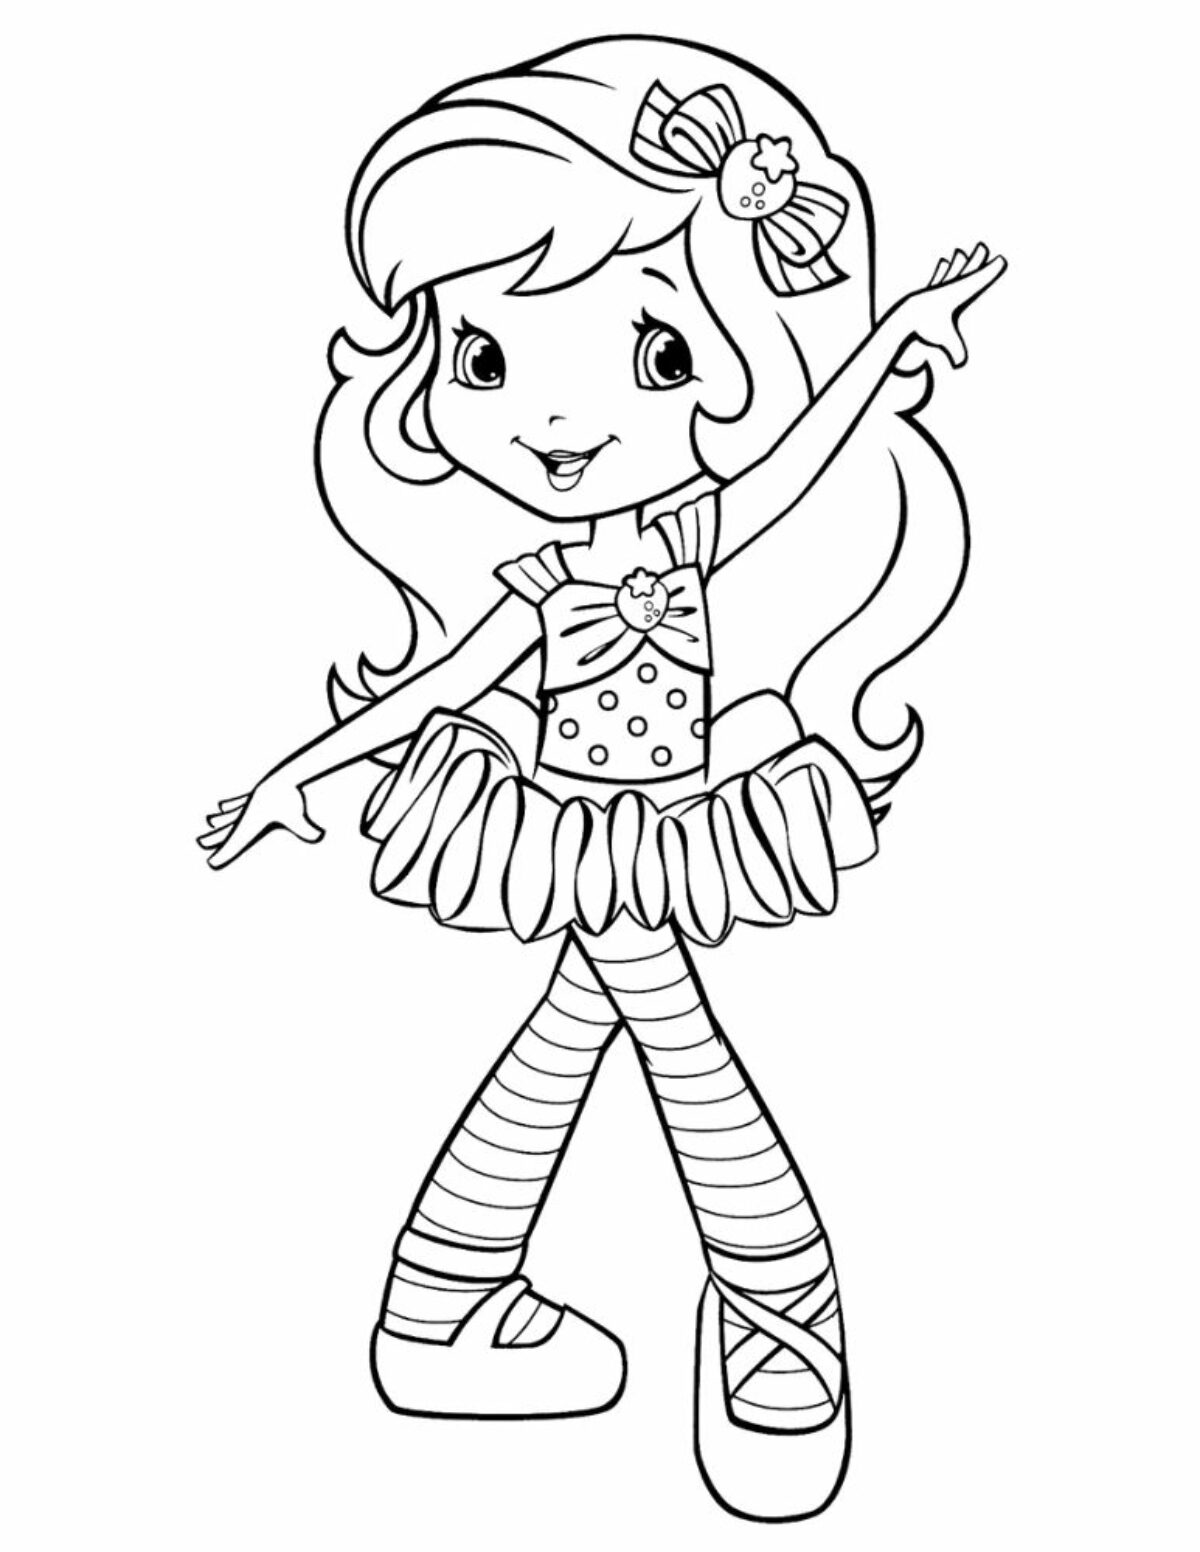 strawberry shortcake plum coloring pages